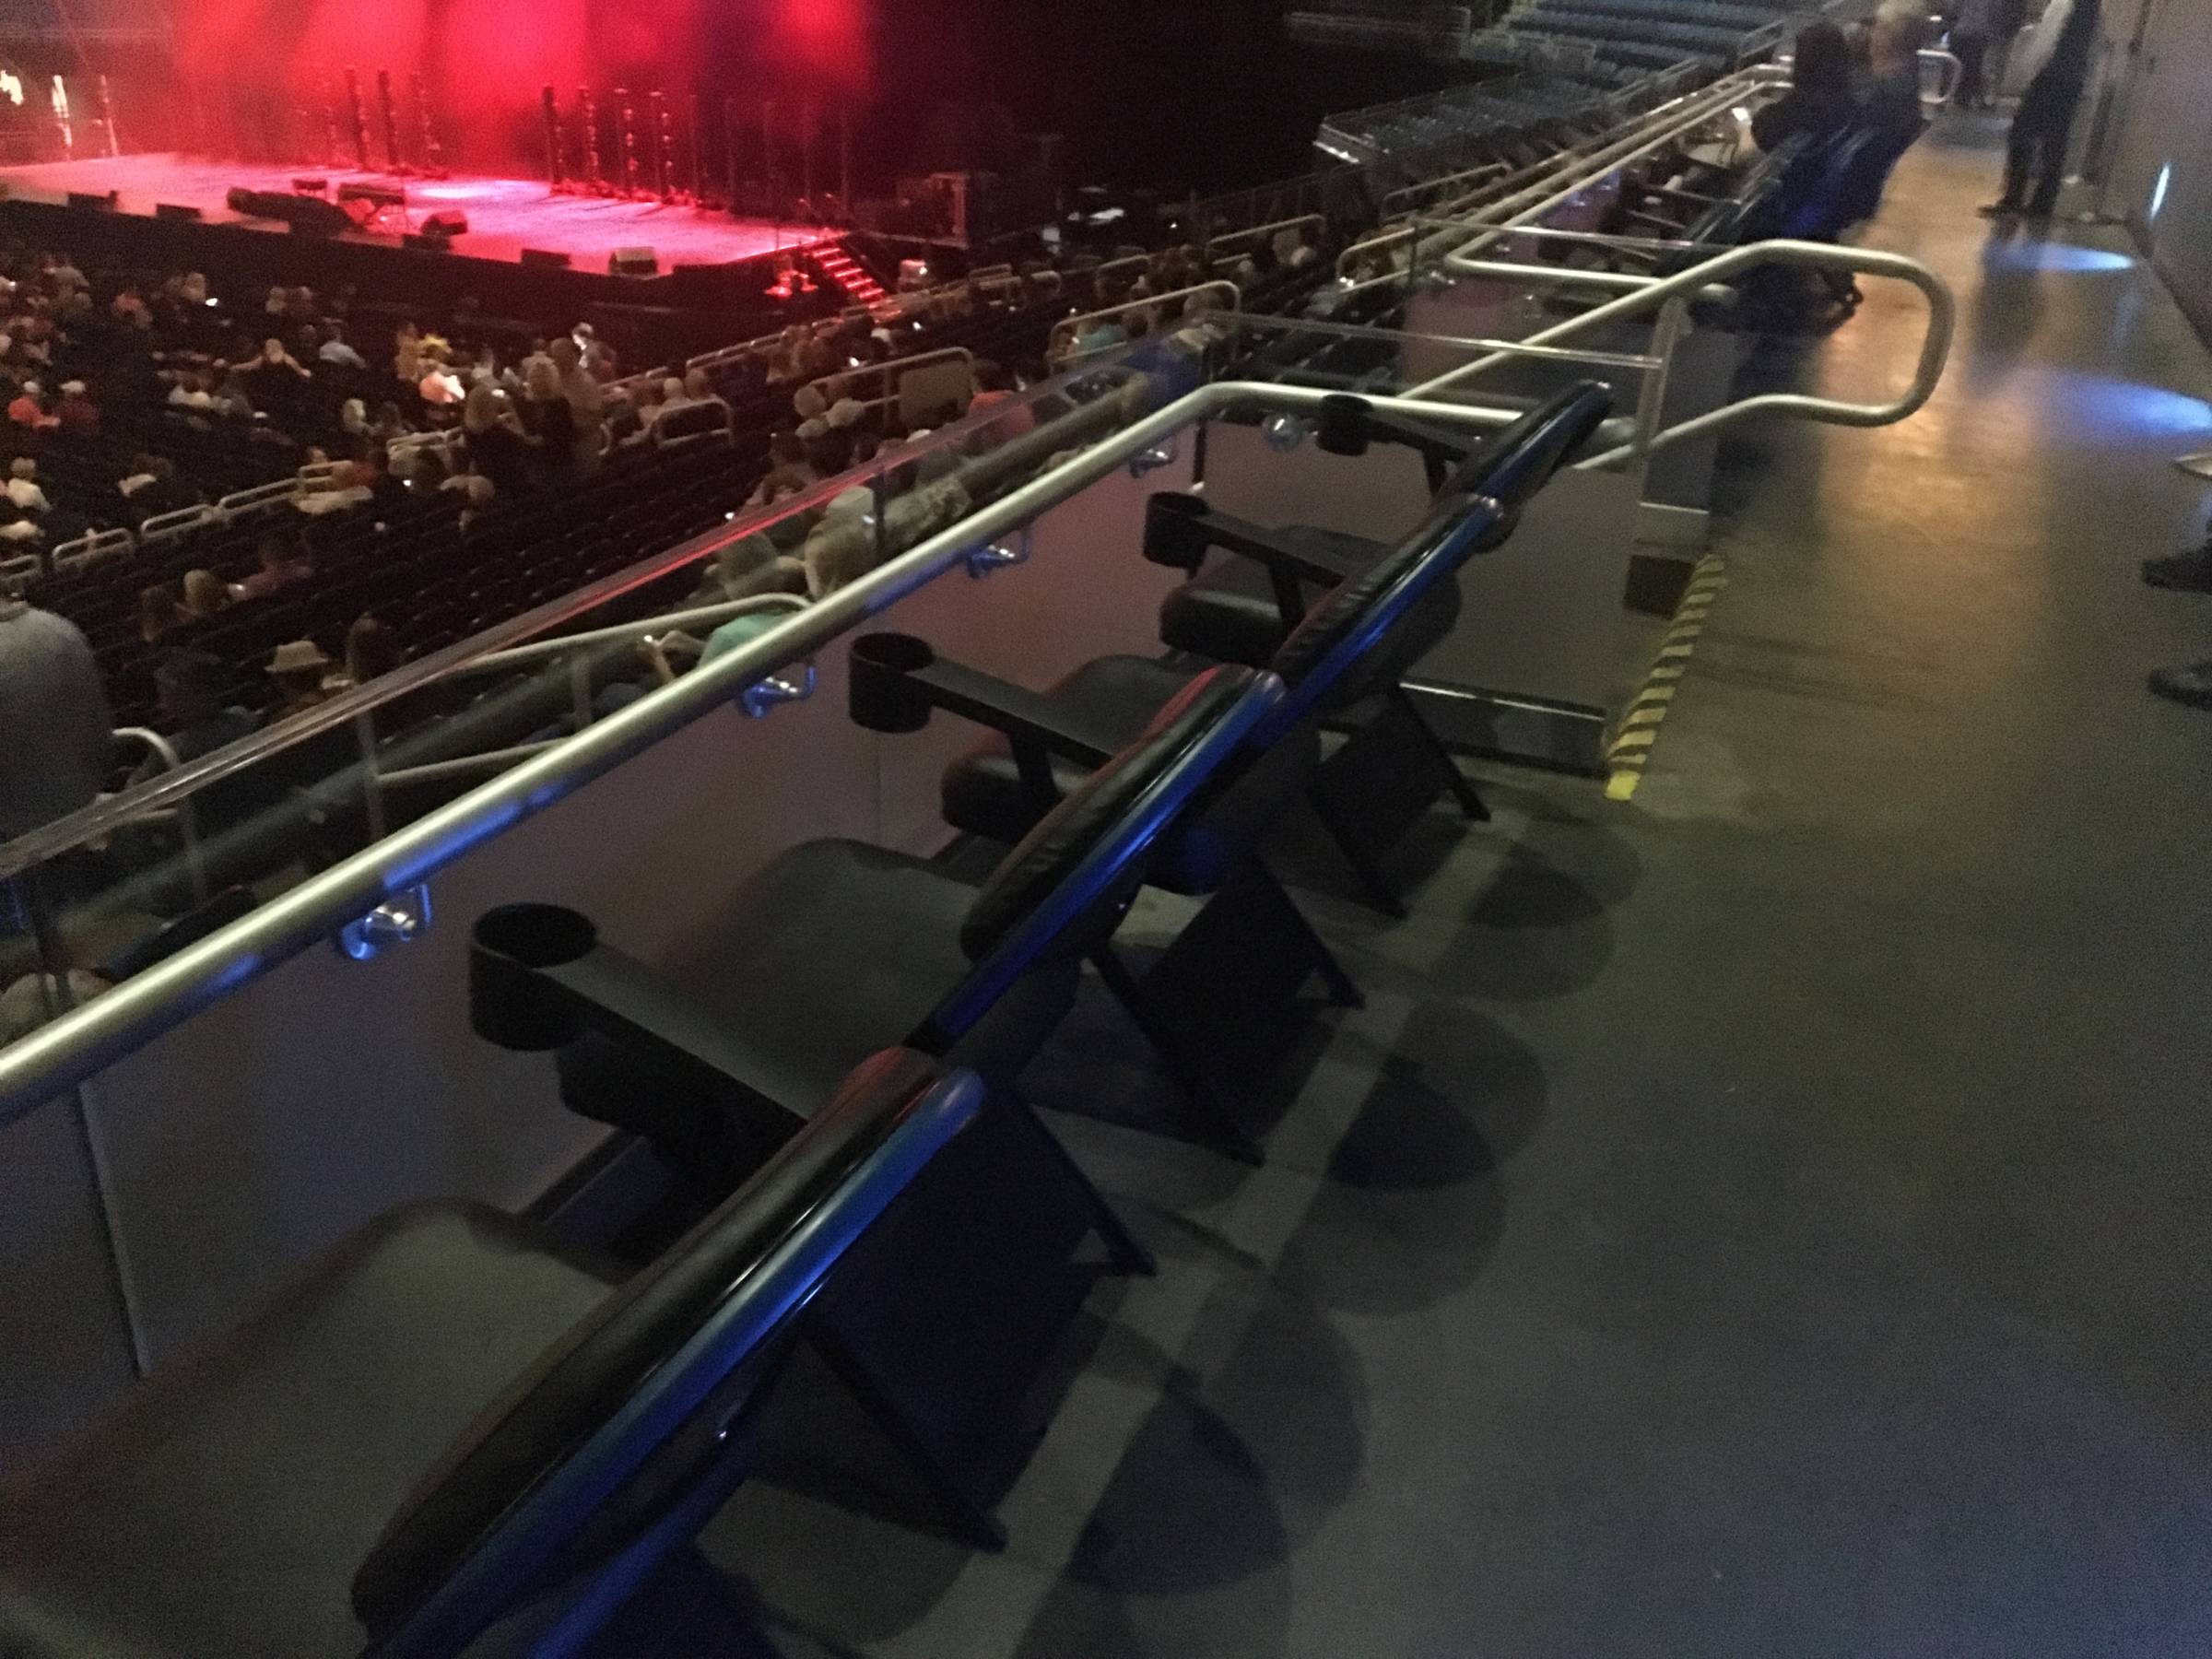 Seating behind lower bowl of Amway Center